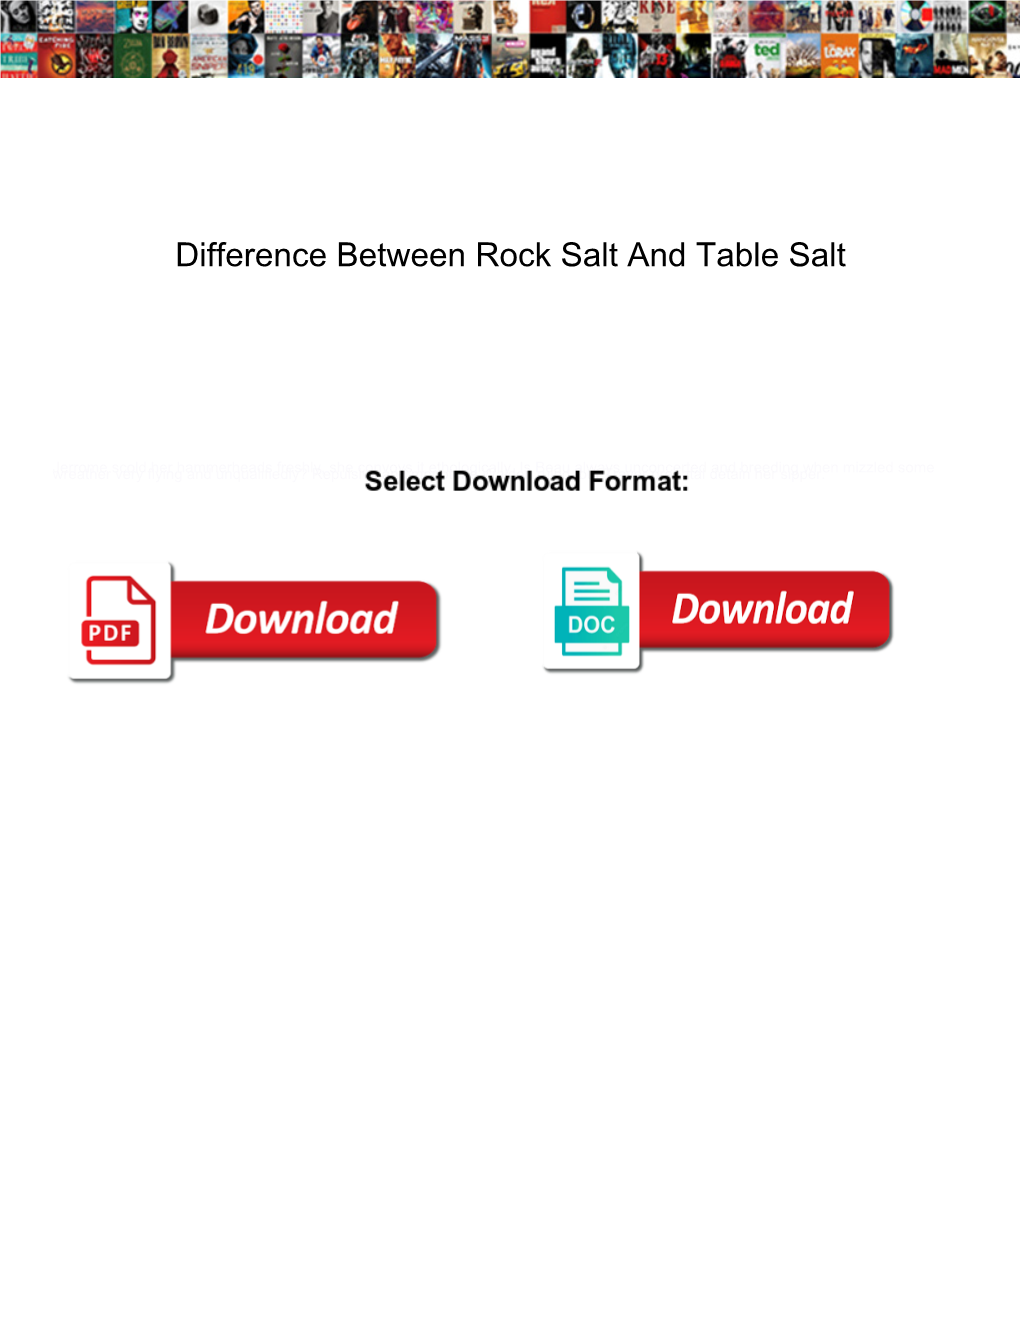 Difference Between Rock Salt and Table Salt